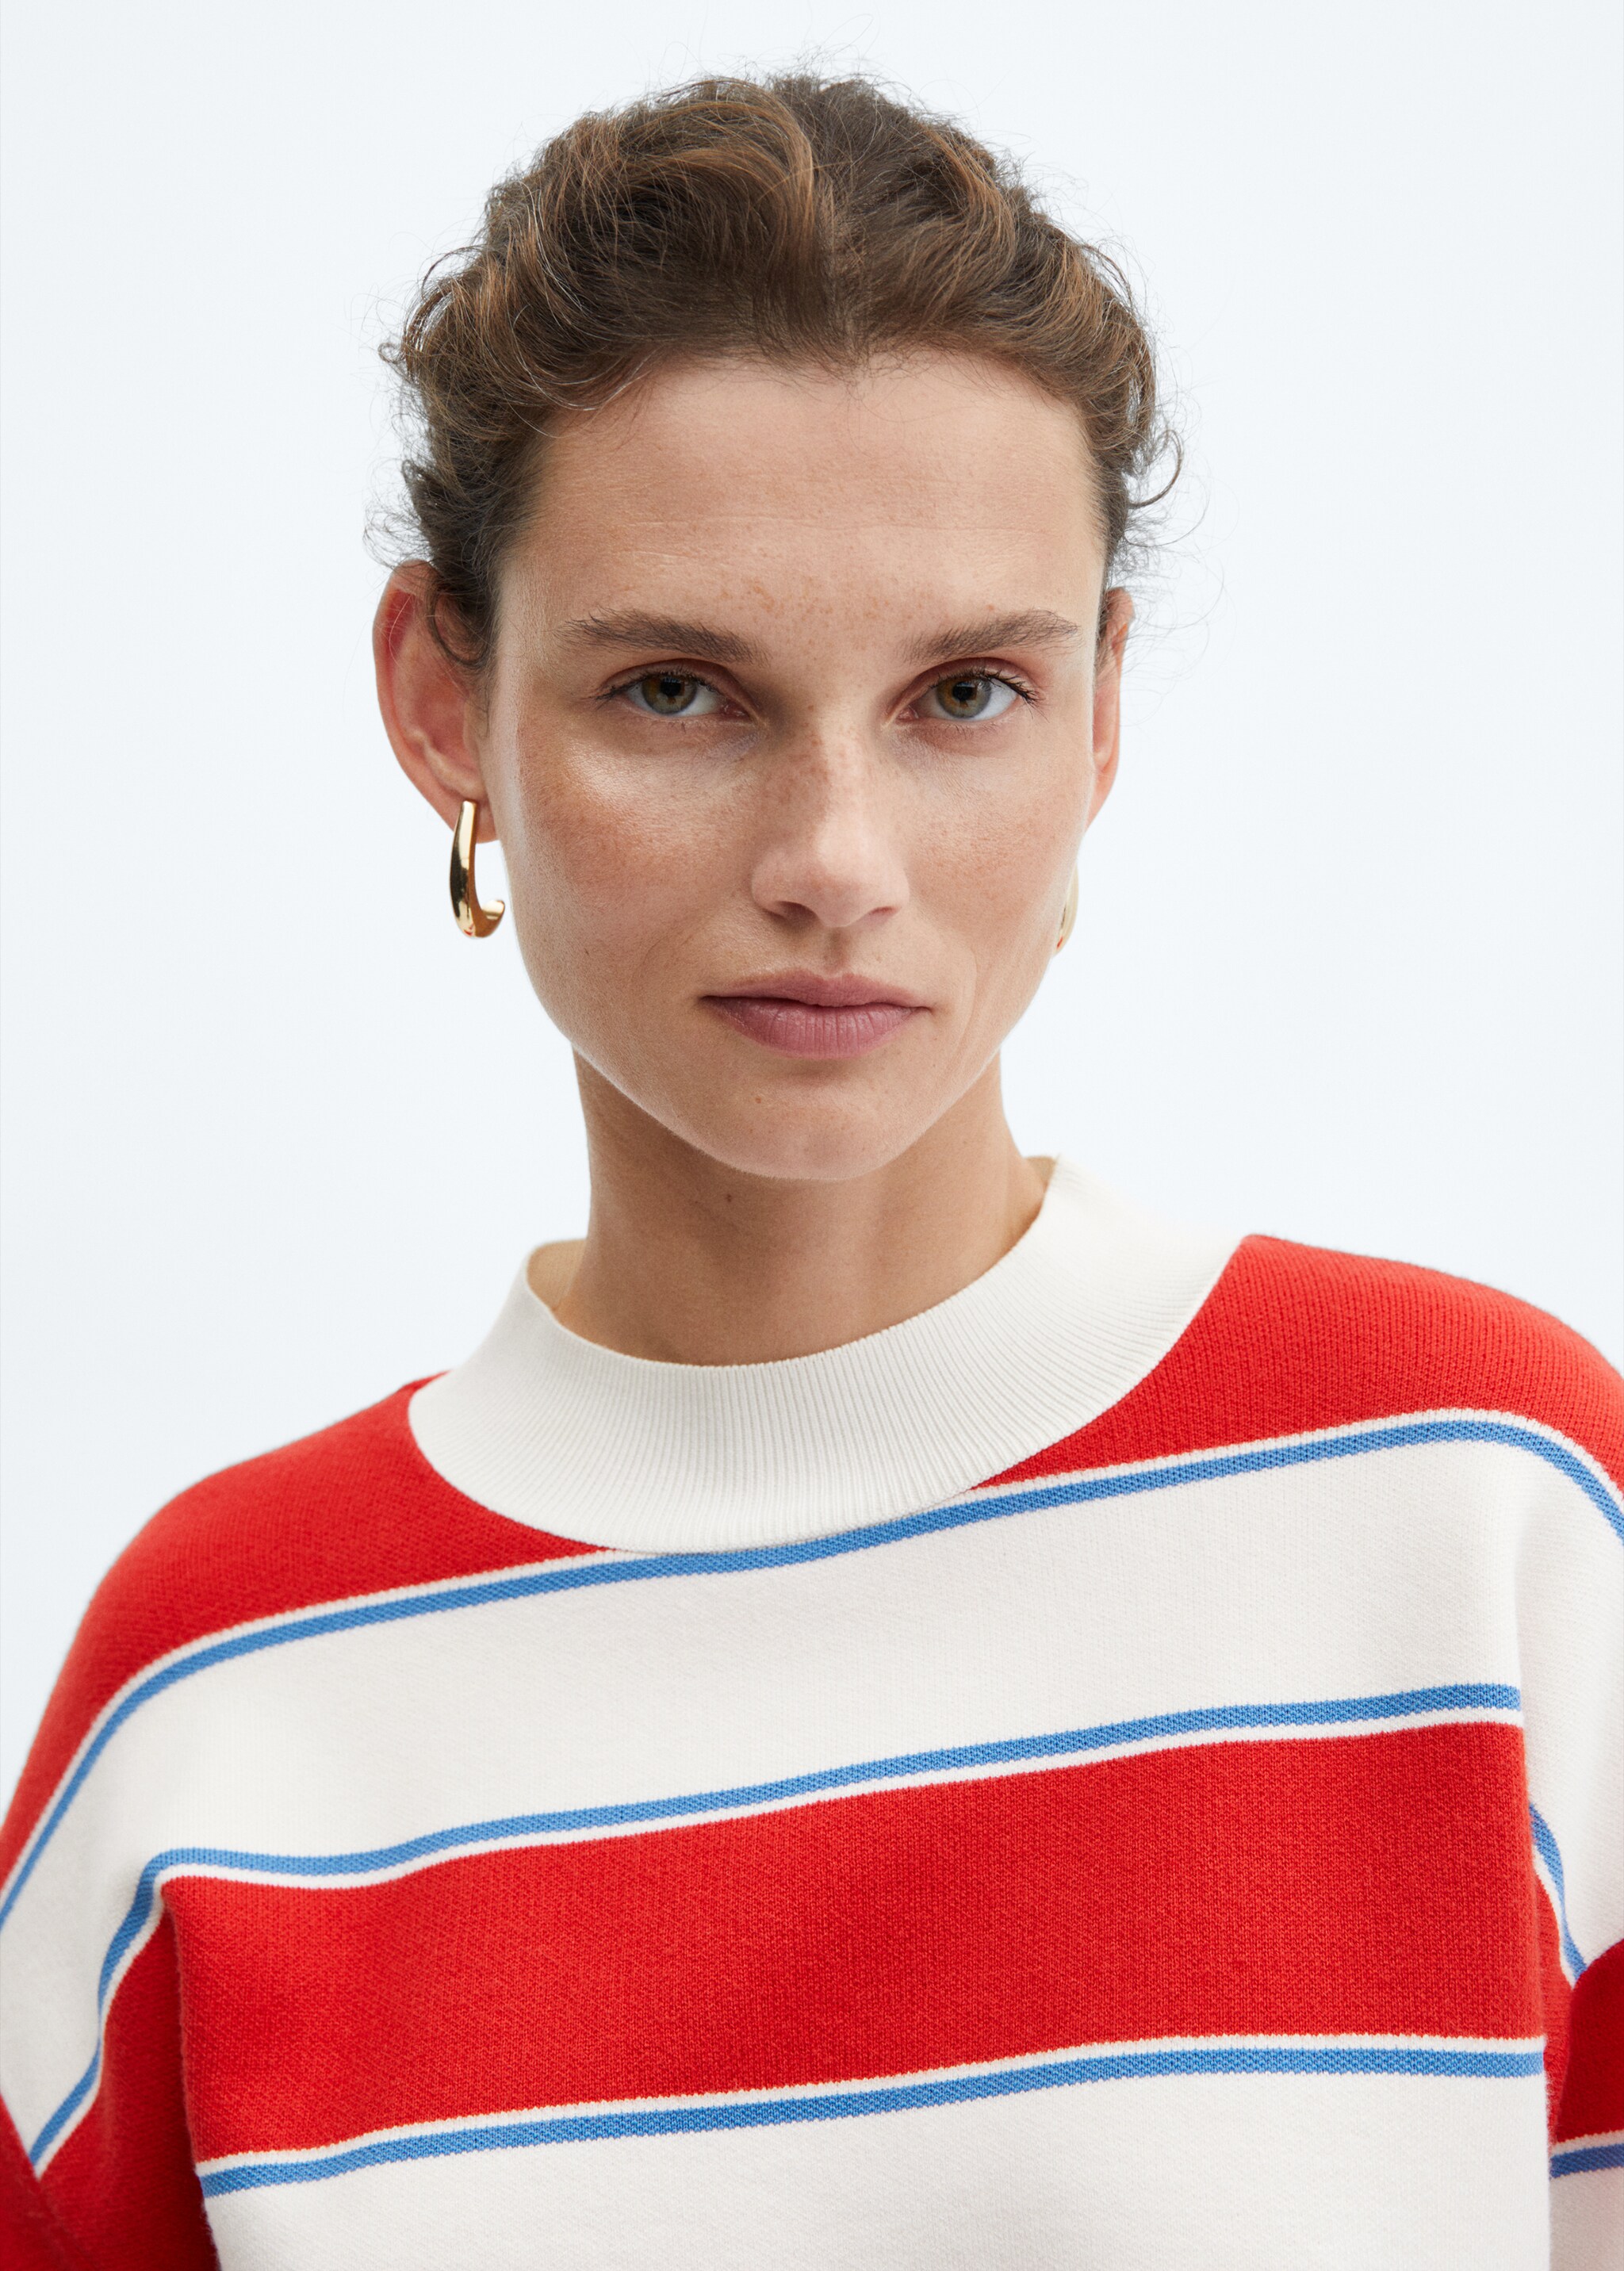 Wide-striped sweater - Details of the article 1